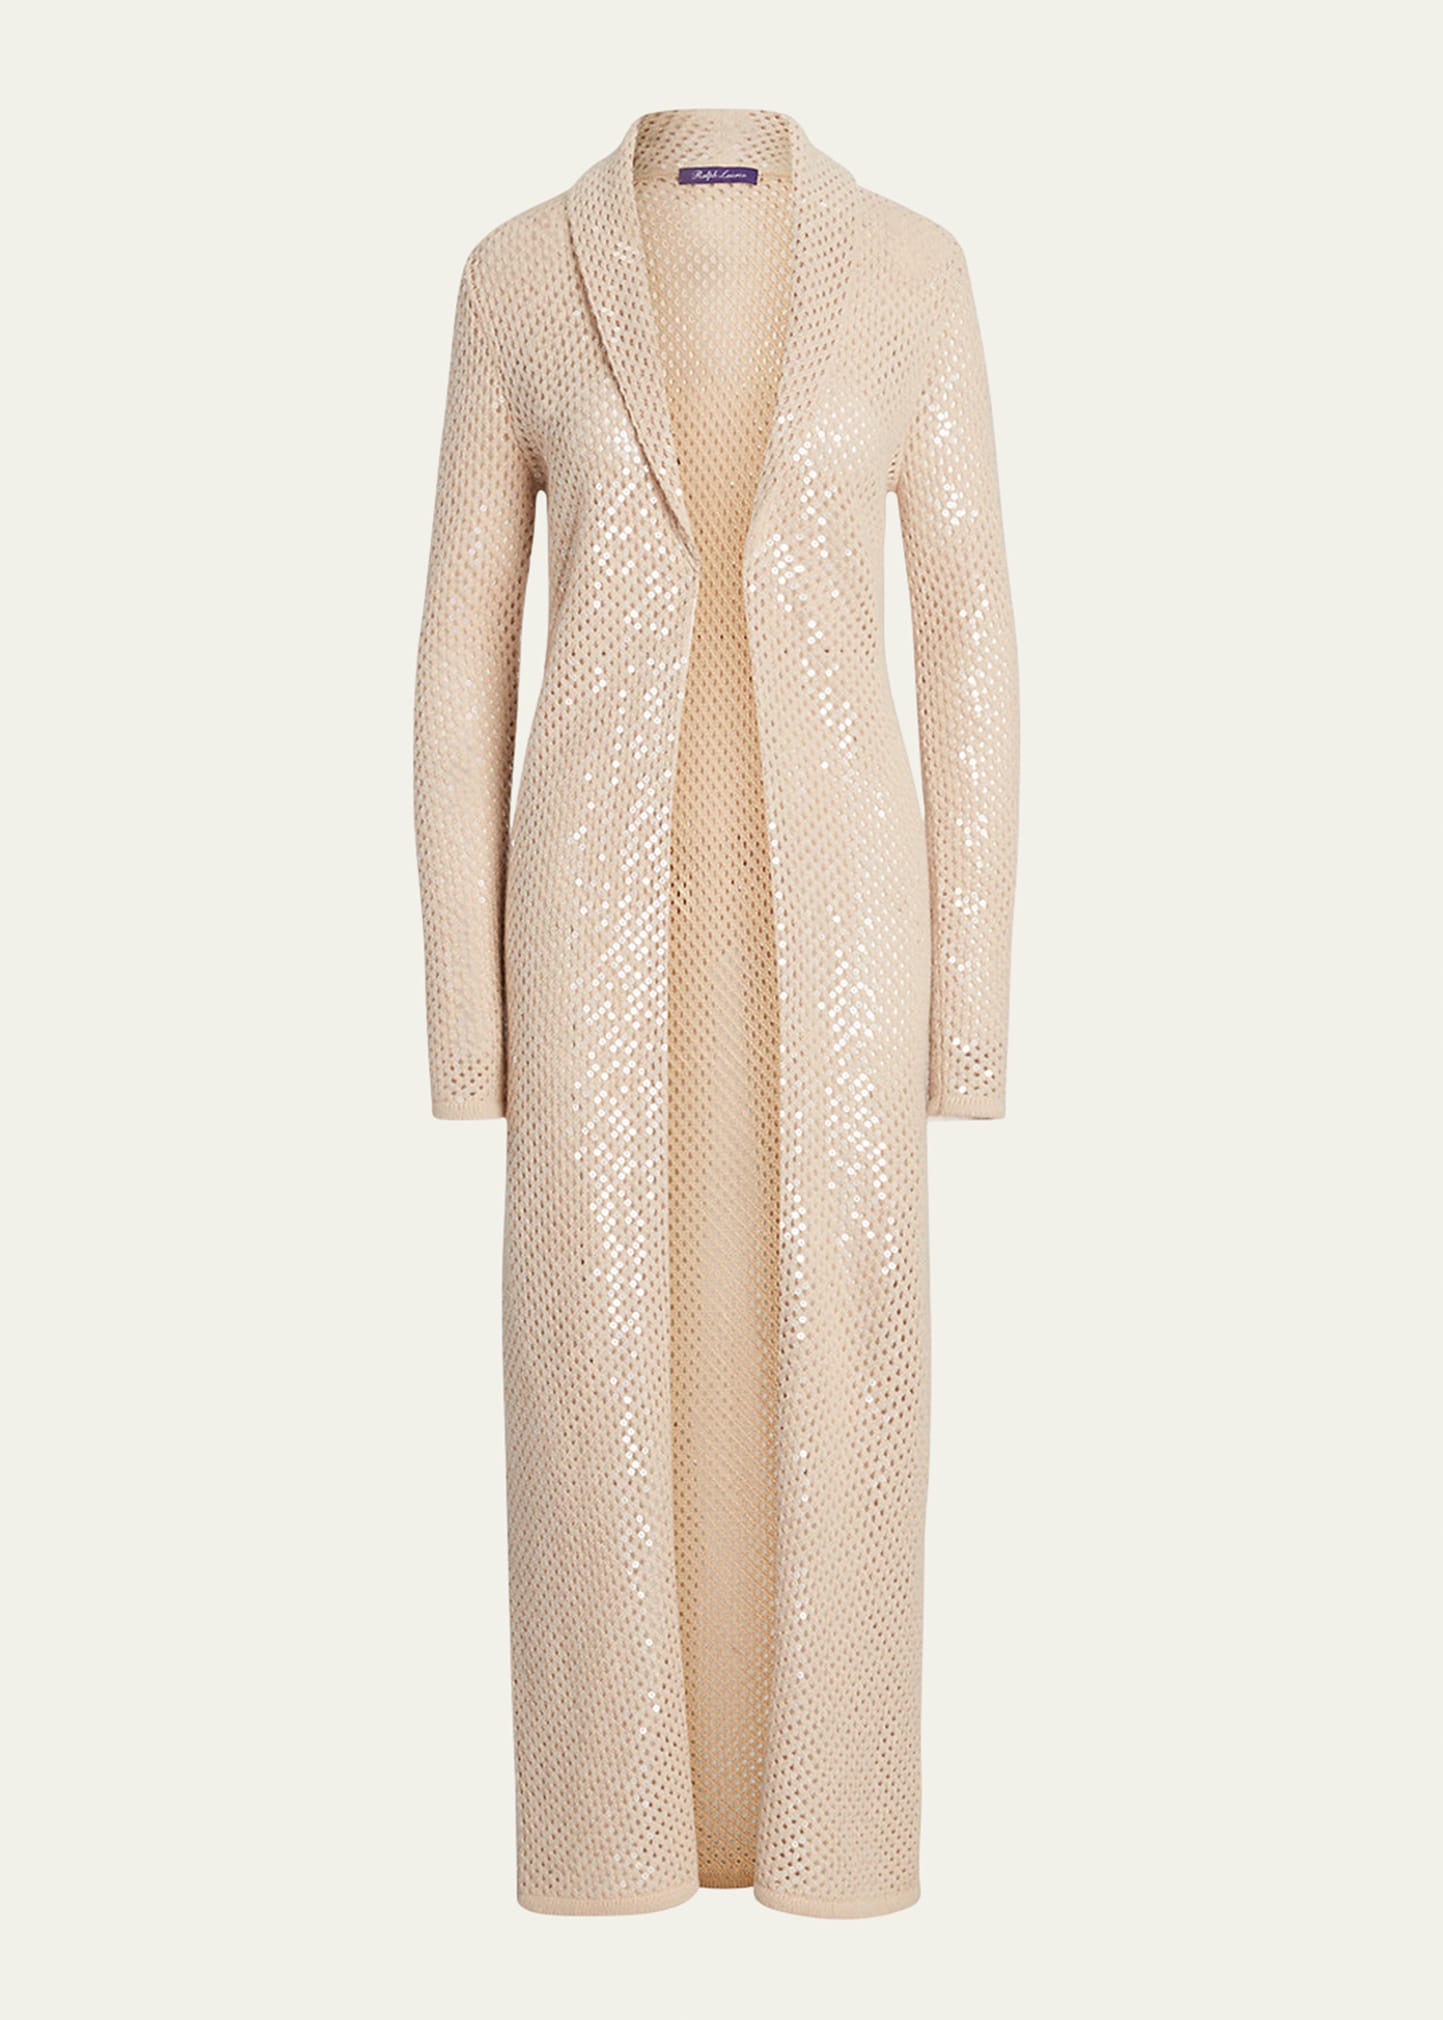 Ralph Lauren Cashmere Open-knit Cardigan With Sequin Details In Fawn